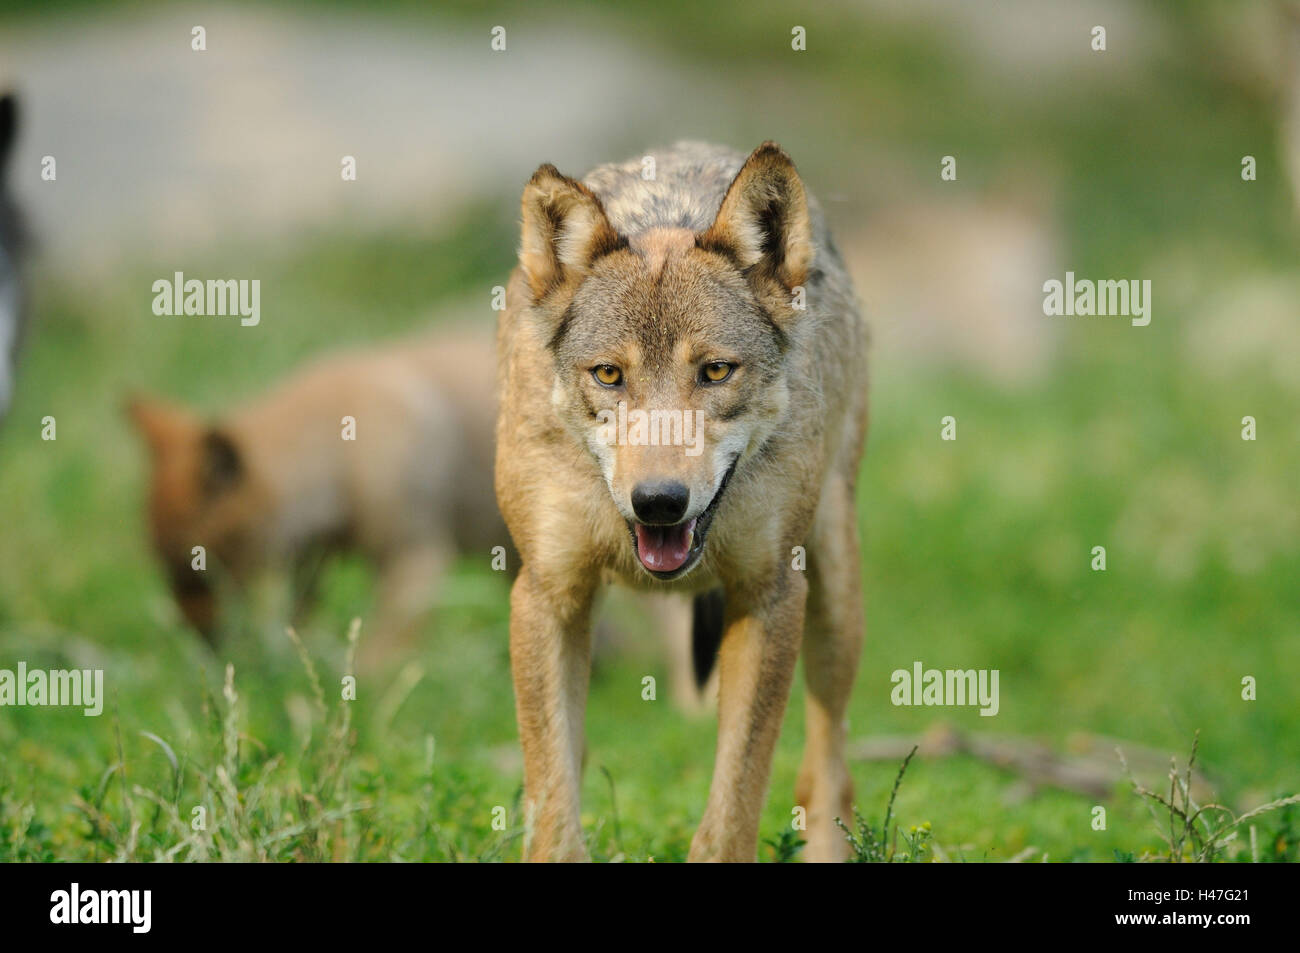 Eastern Timber Wolf, Canis lupus lycaon, vue avant, marche, looking at camera, Banque D'Images